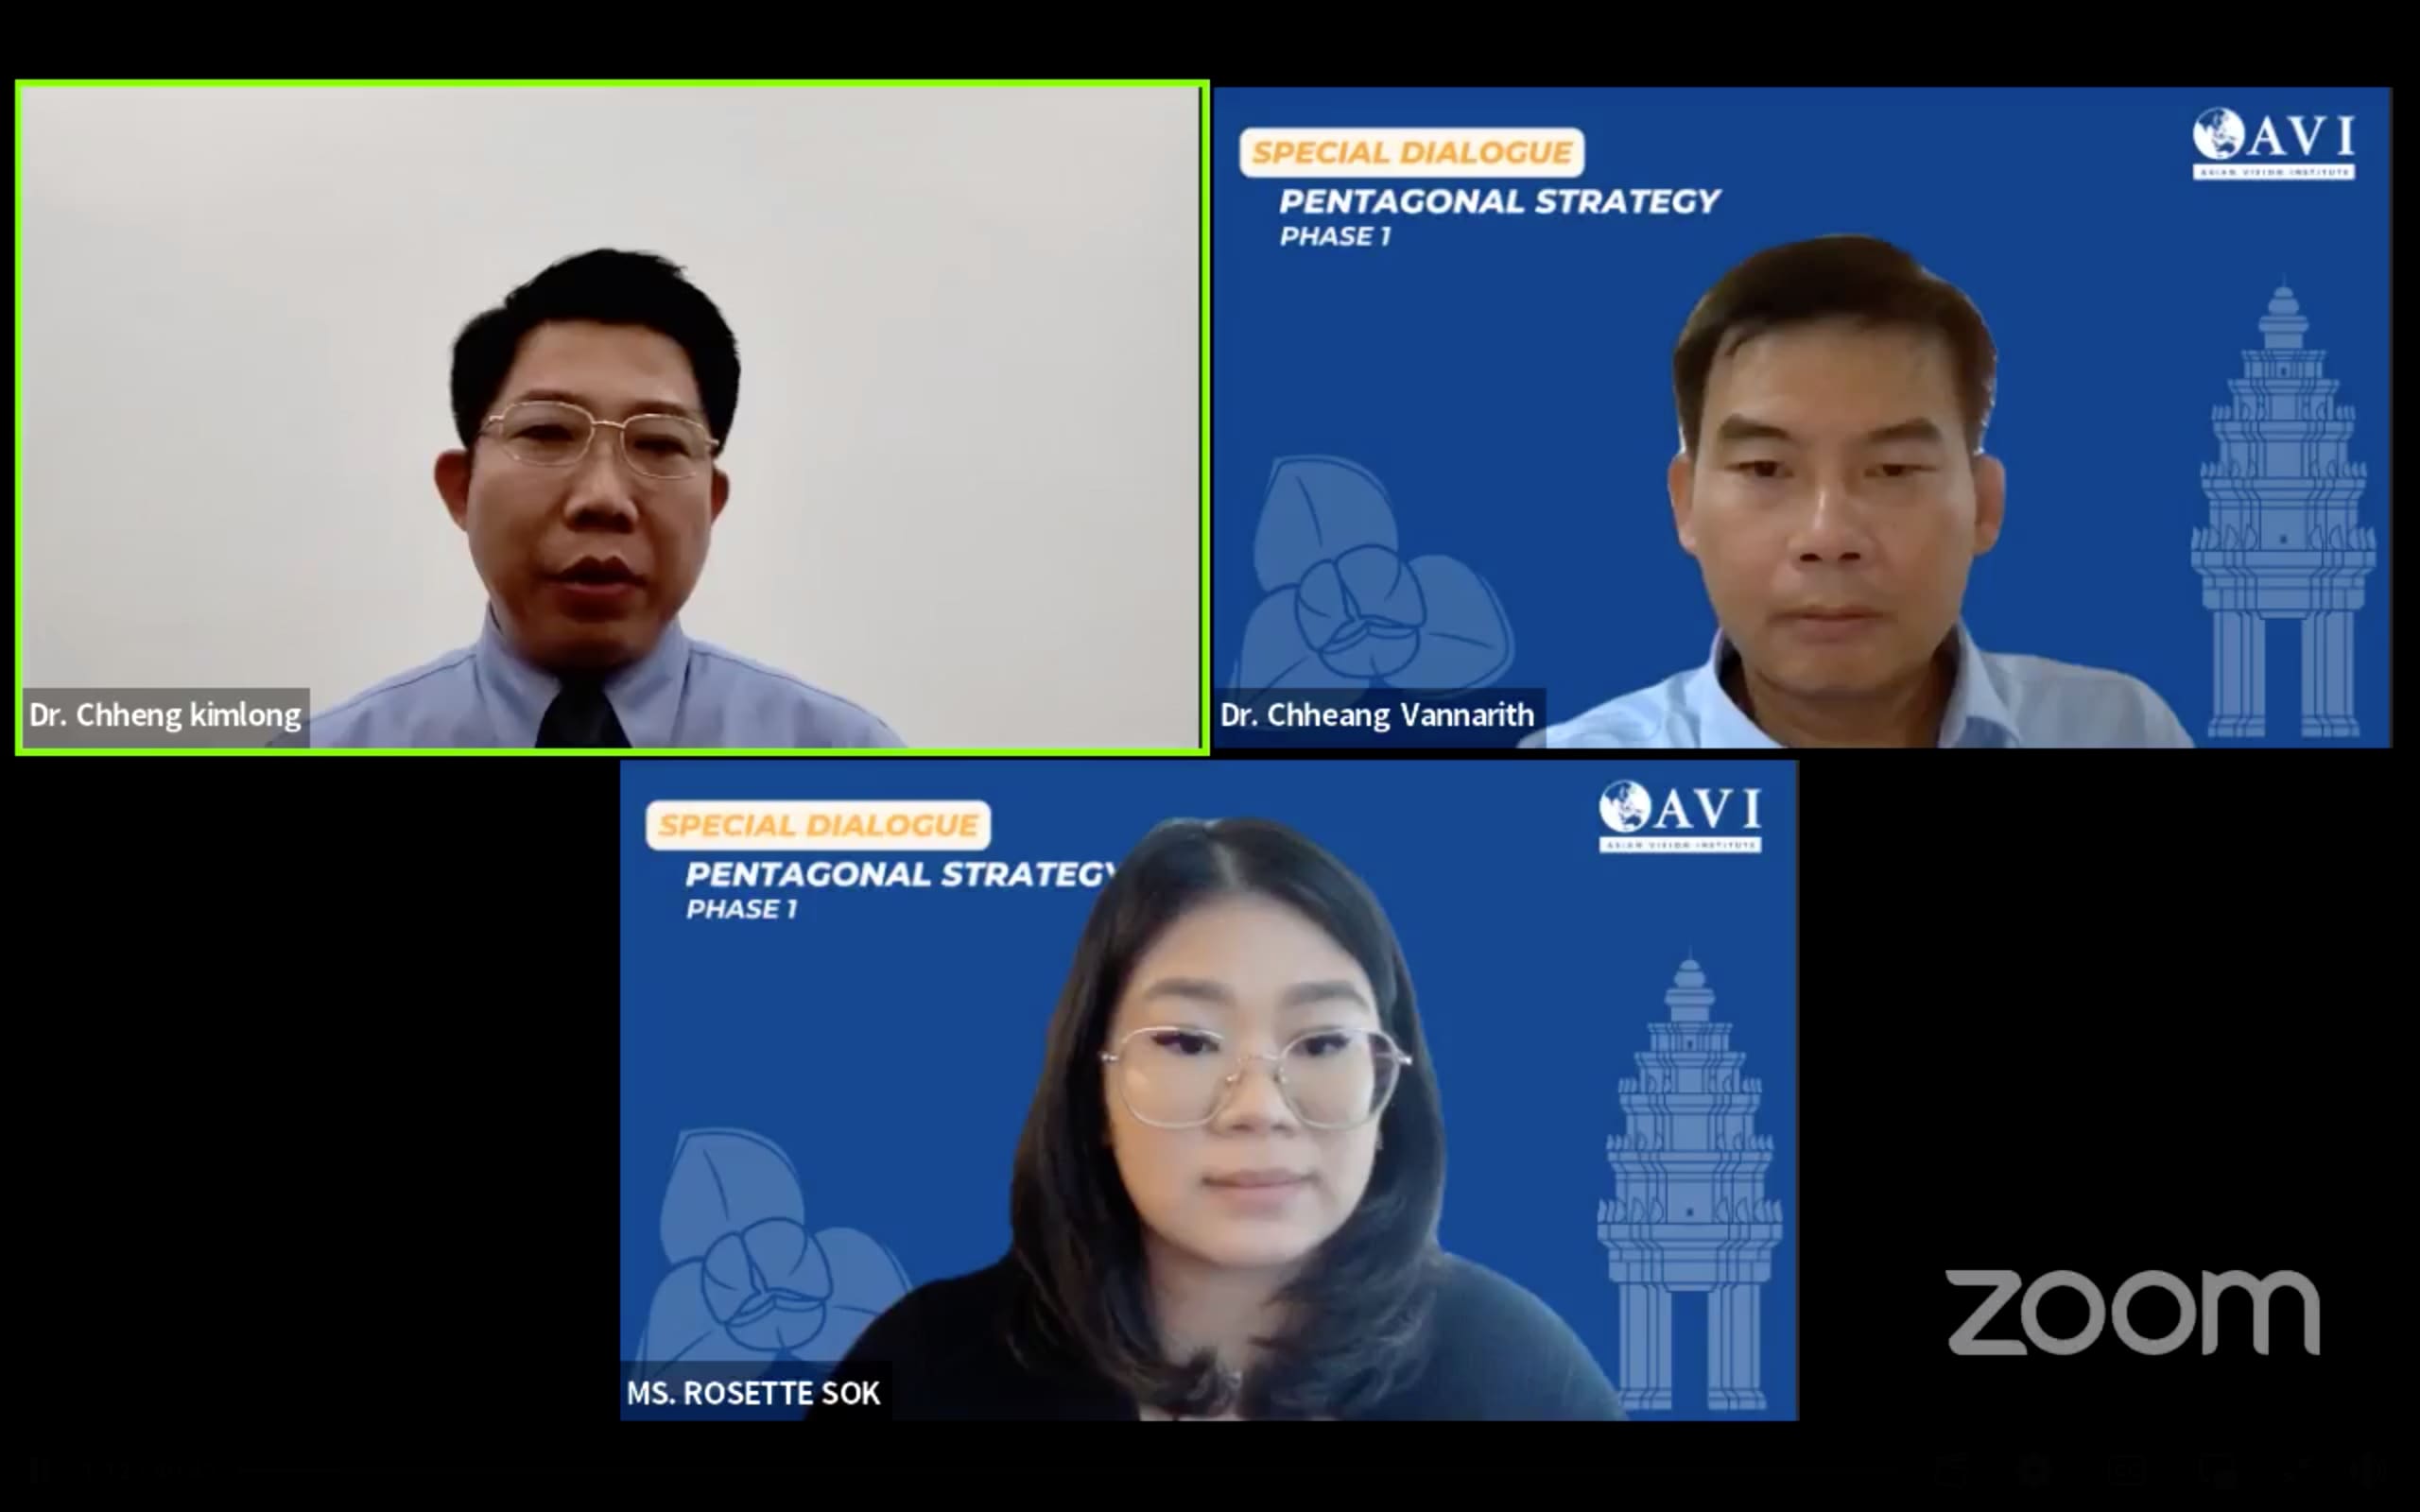 Screenshot of the online seminar organised by the Asian Vision Institute (AVI) on the Pentagonal Strategy - Phase 1